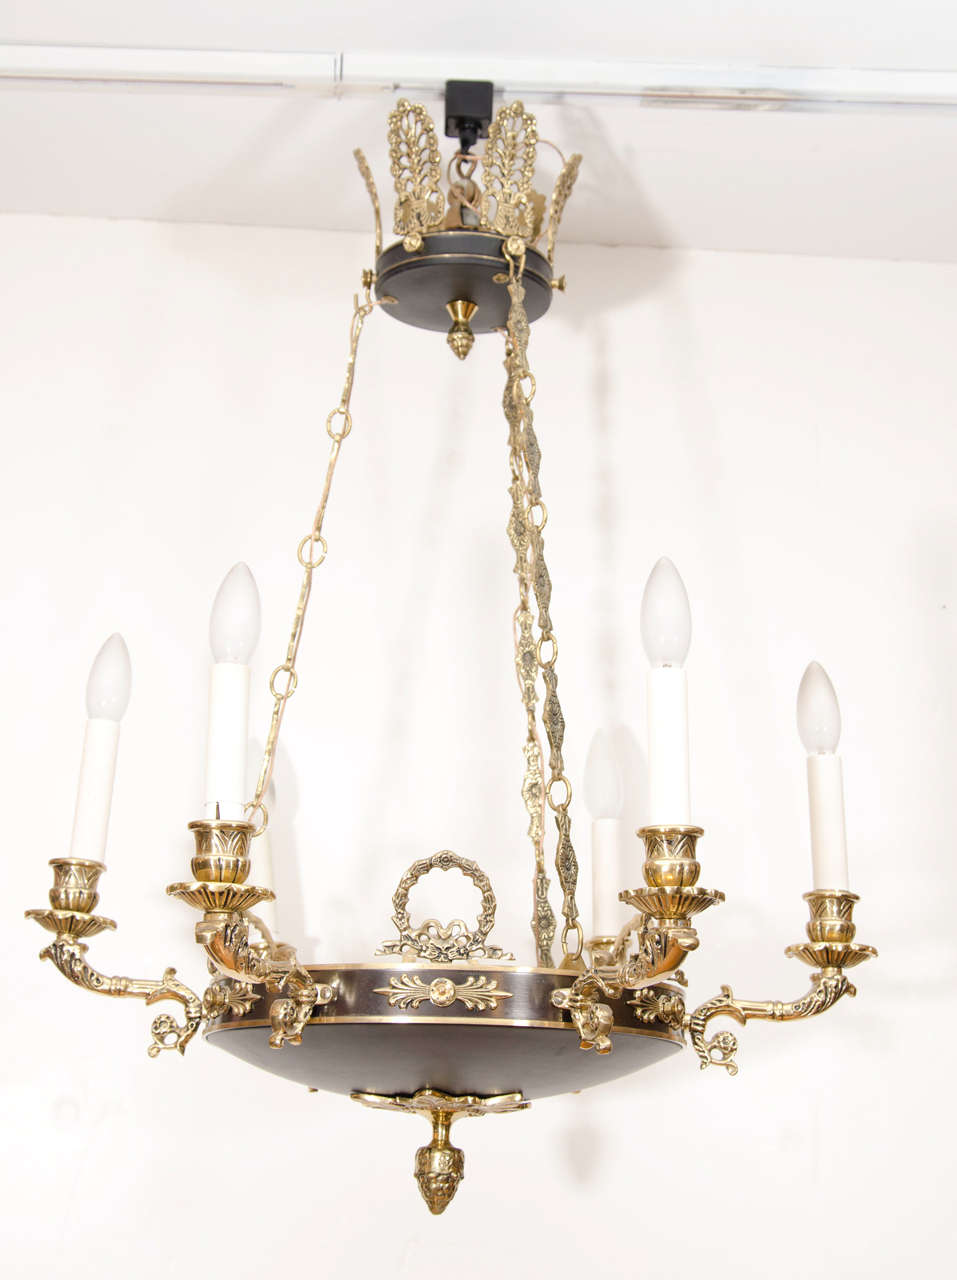 Patinated brass and brass details copied from the pre-electricity Gustavian period, featuring six faux candles hanging on three decorative brass chains, surmounted by a 